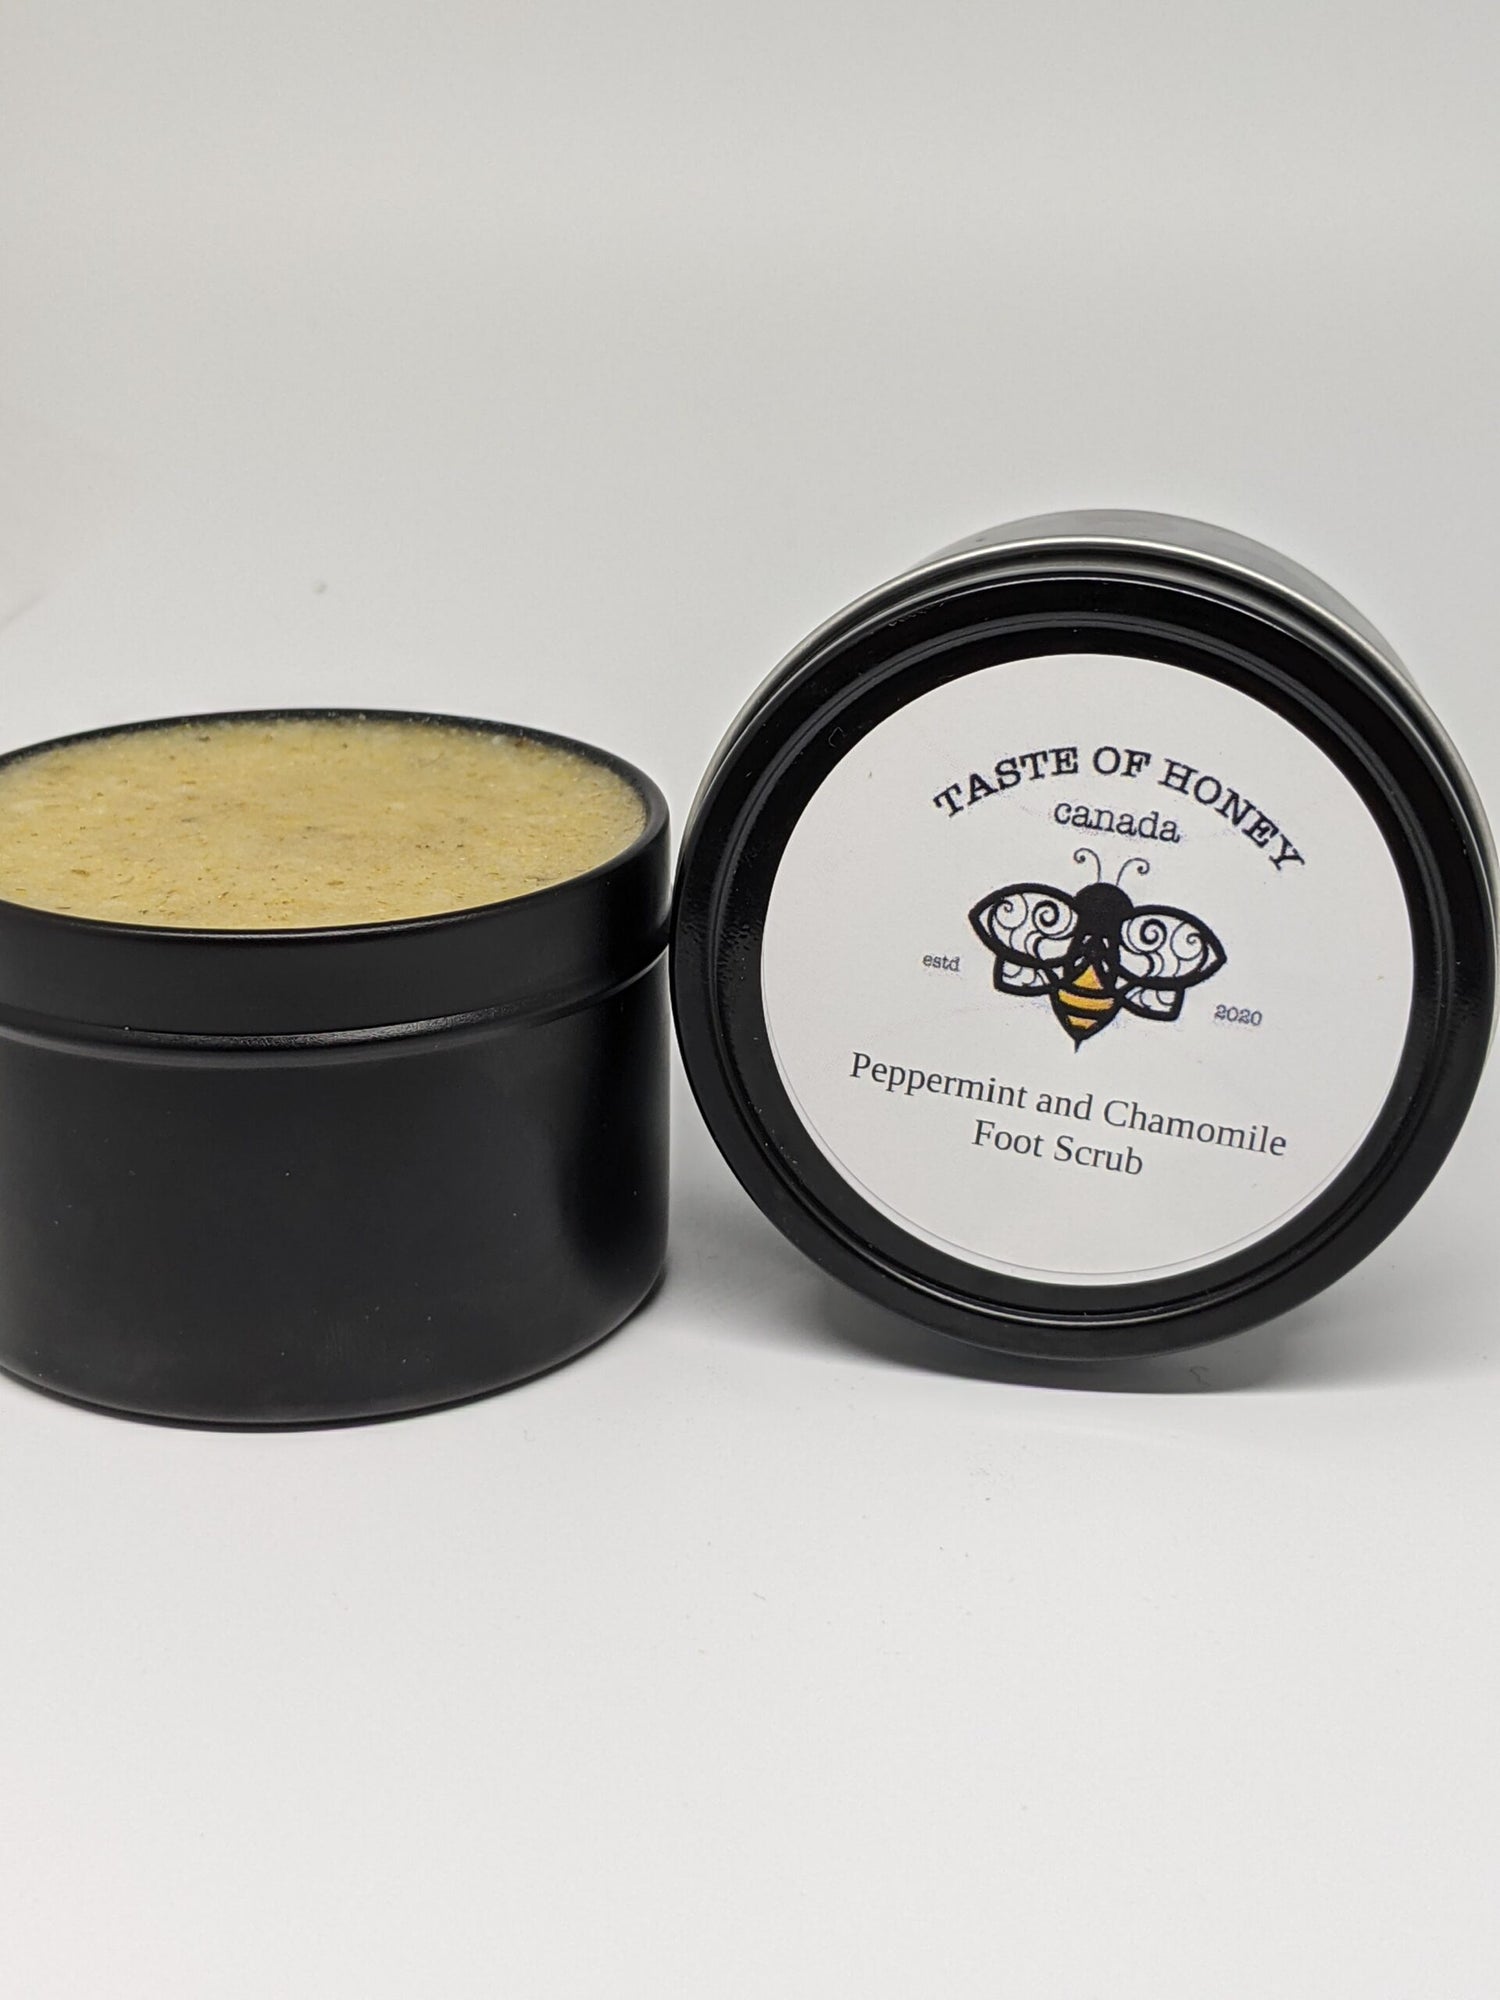 Peppermint and Chamomile Foot scrub.  Black tin white label with bee logo.  Deep yellow color product